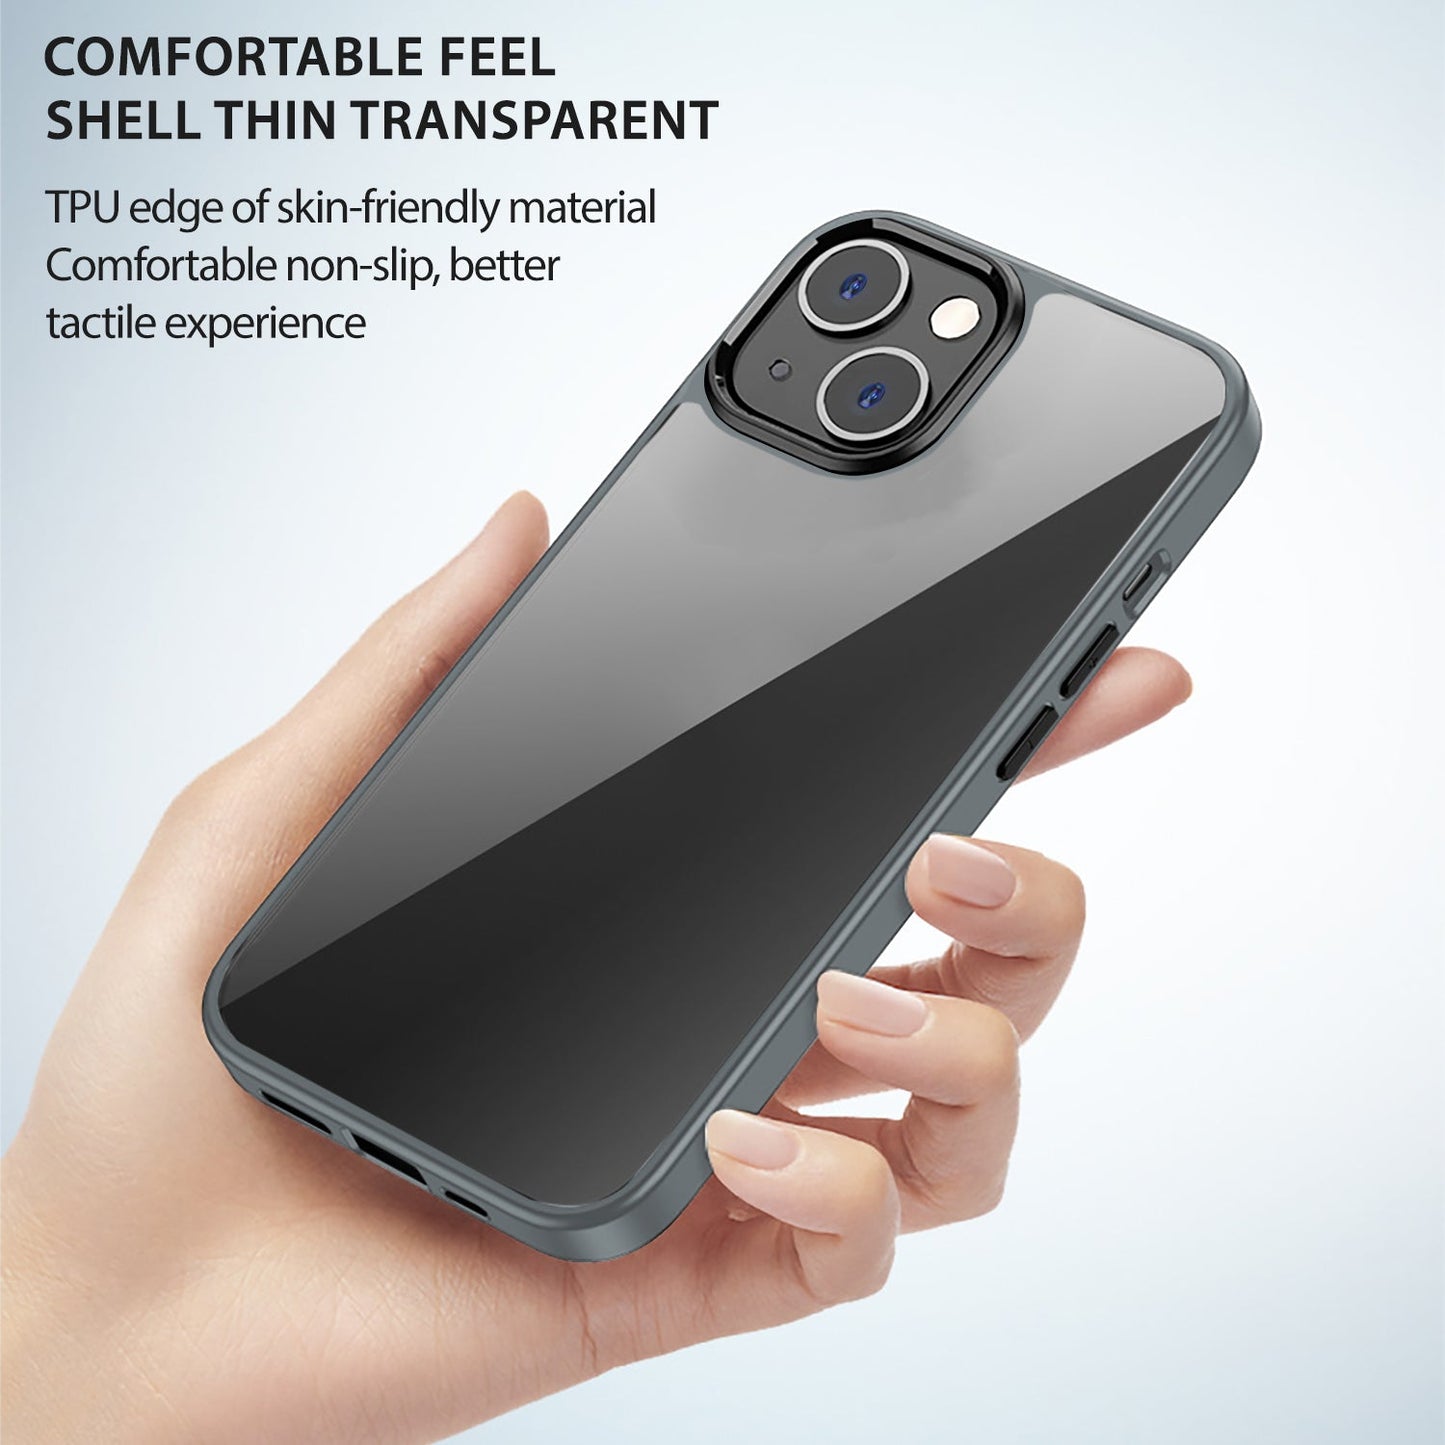 Gripp Ming Case For Apple Iphone 13 (6.1") - Grey